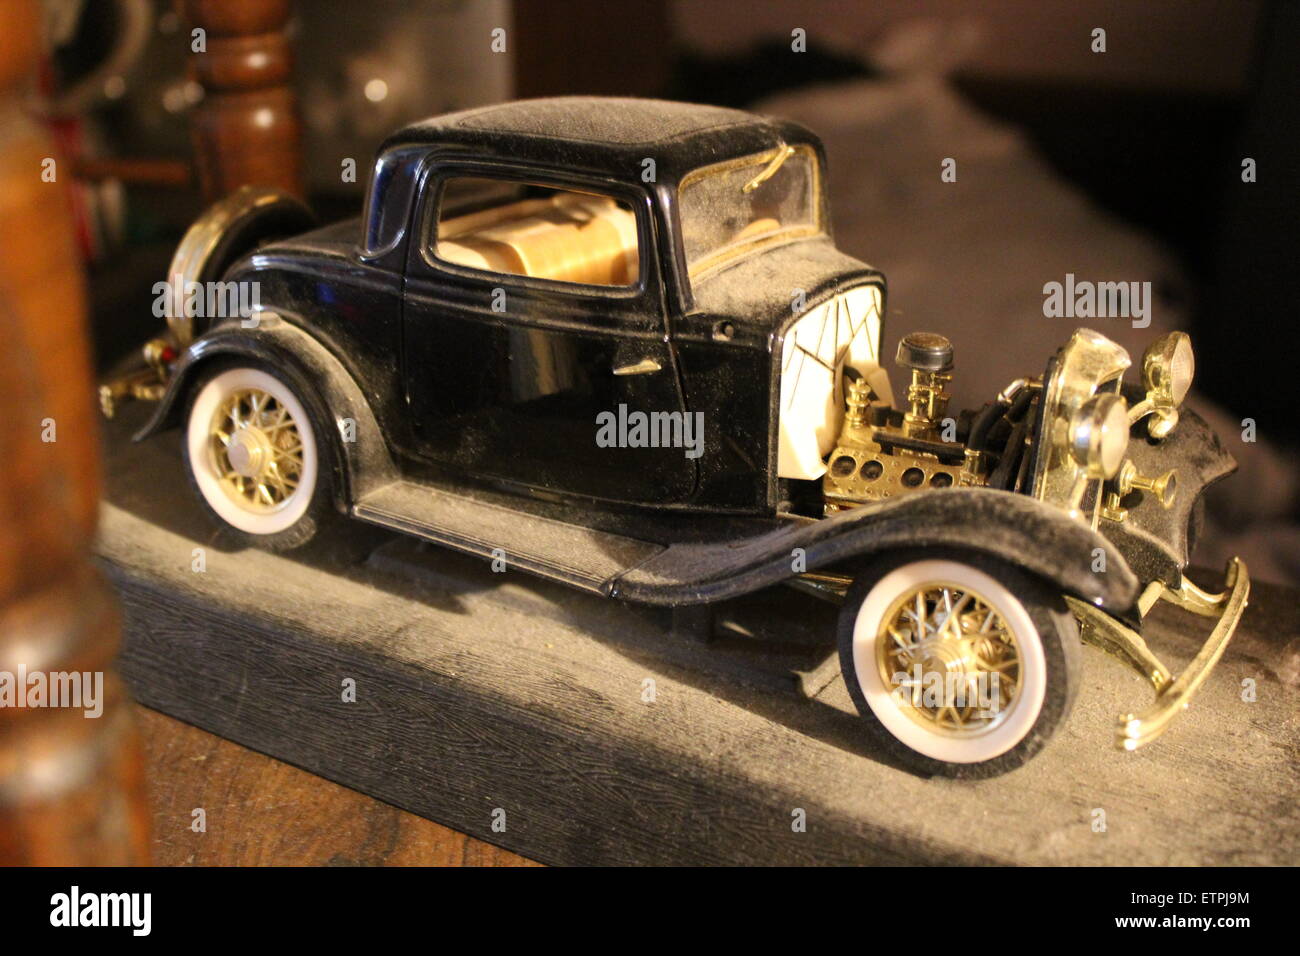 Antique toy 1932 Buick car. Stock Photo